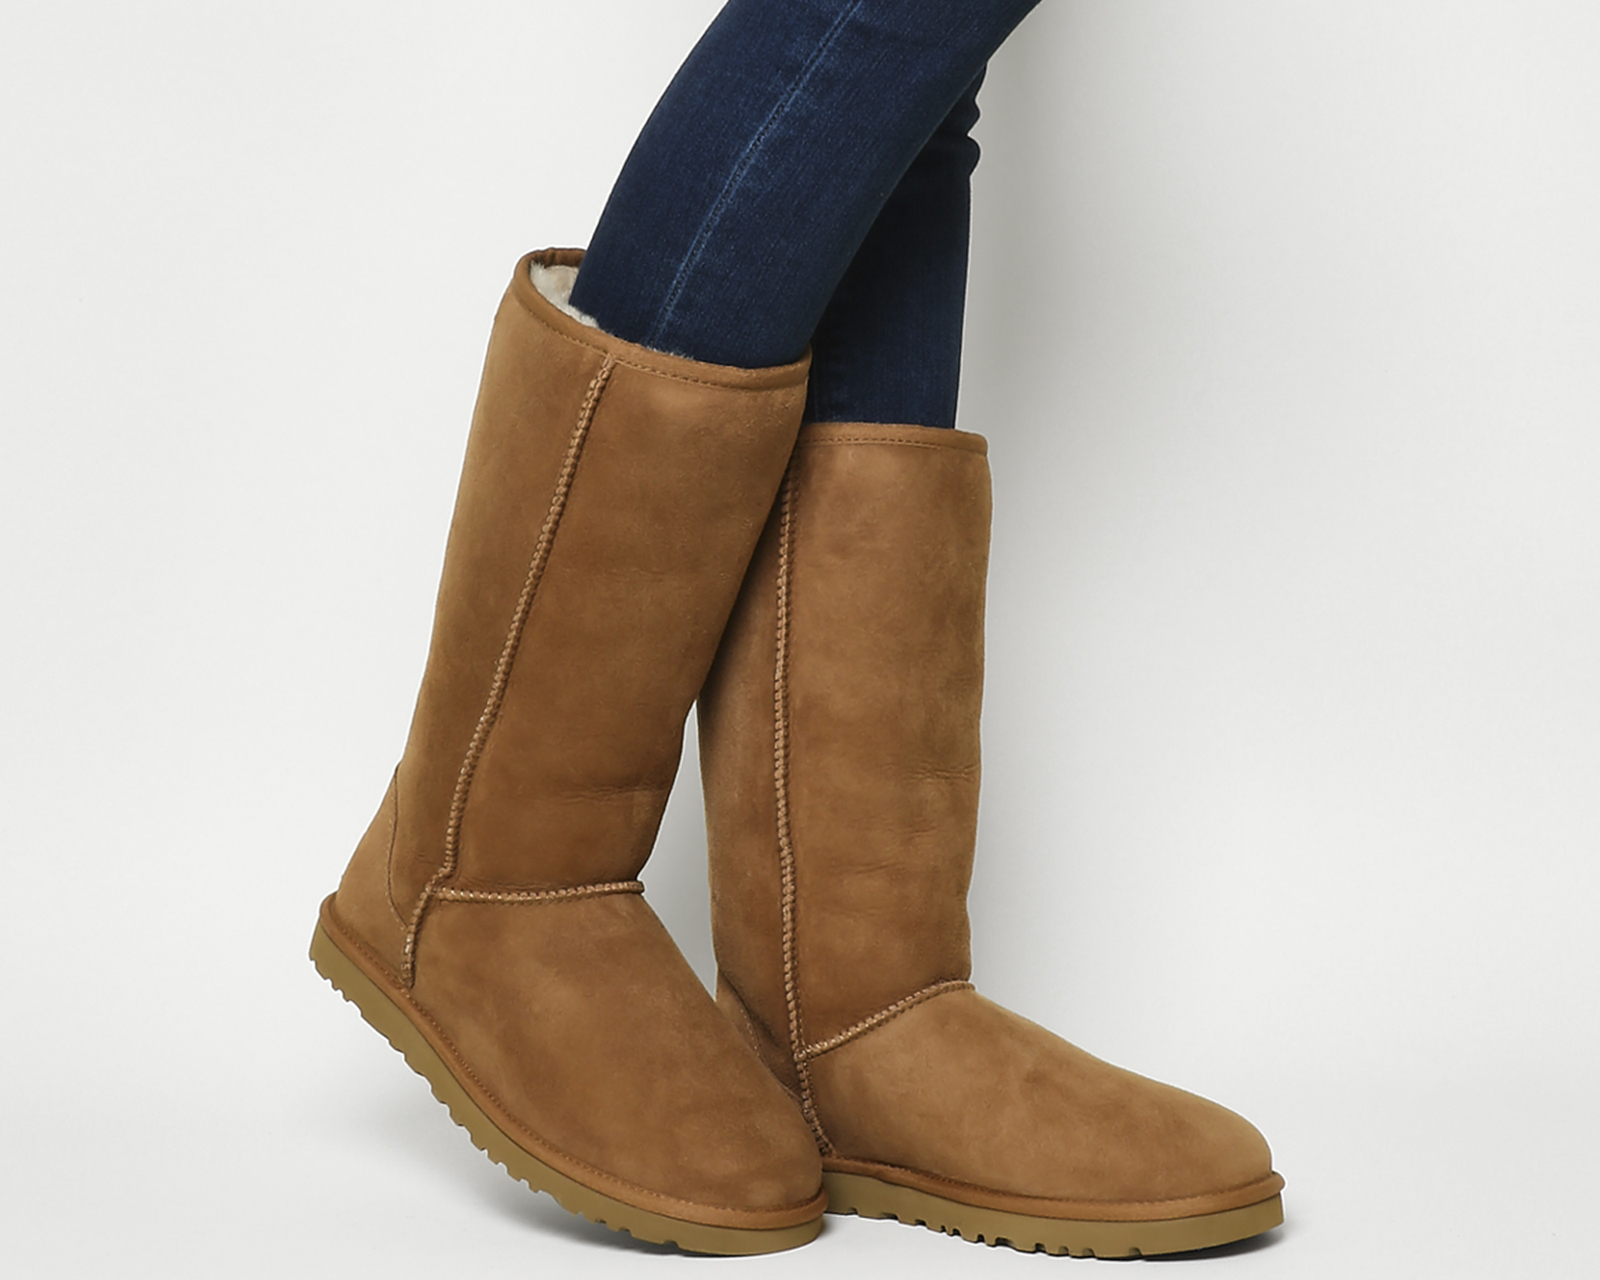 ugg boots office uk > Clearance shop